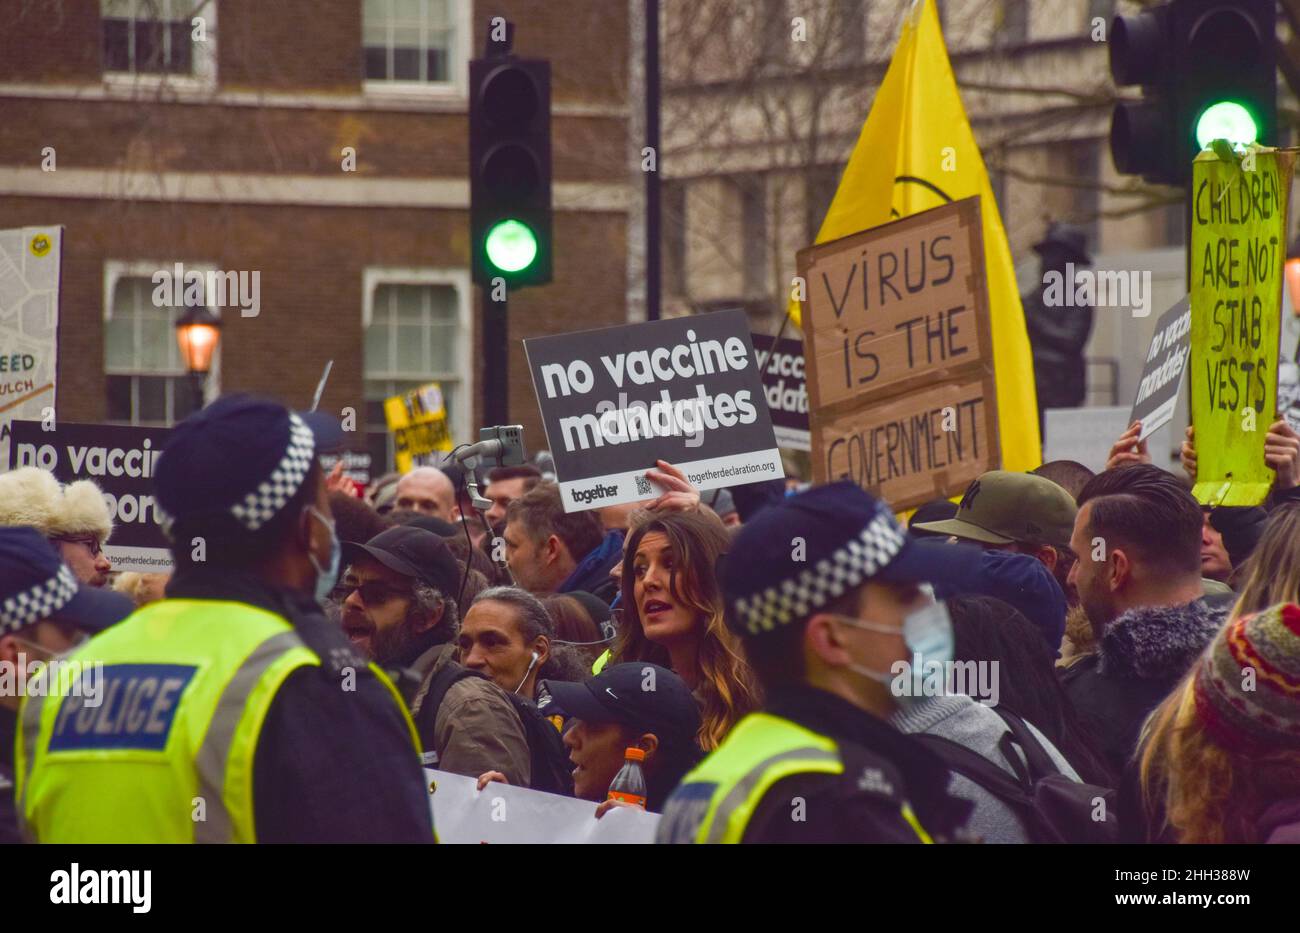 London, UK 22nd January 2022. Protesters outside Downing Street. Thousands of people marched through Central London in protest against mandatory vaccines for NHS staff, face masks, covid vaccines, vaccination passports and various other grievances fuelled by conspiracy theories. Stock Photo